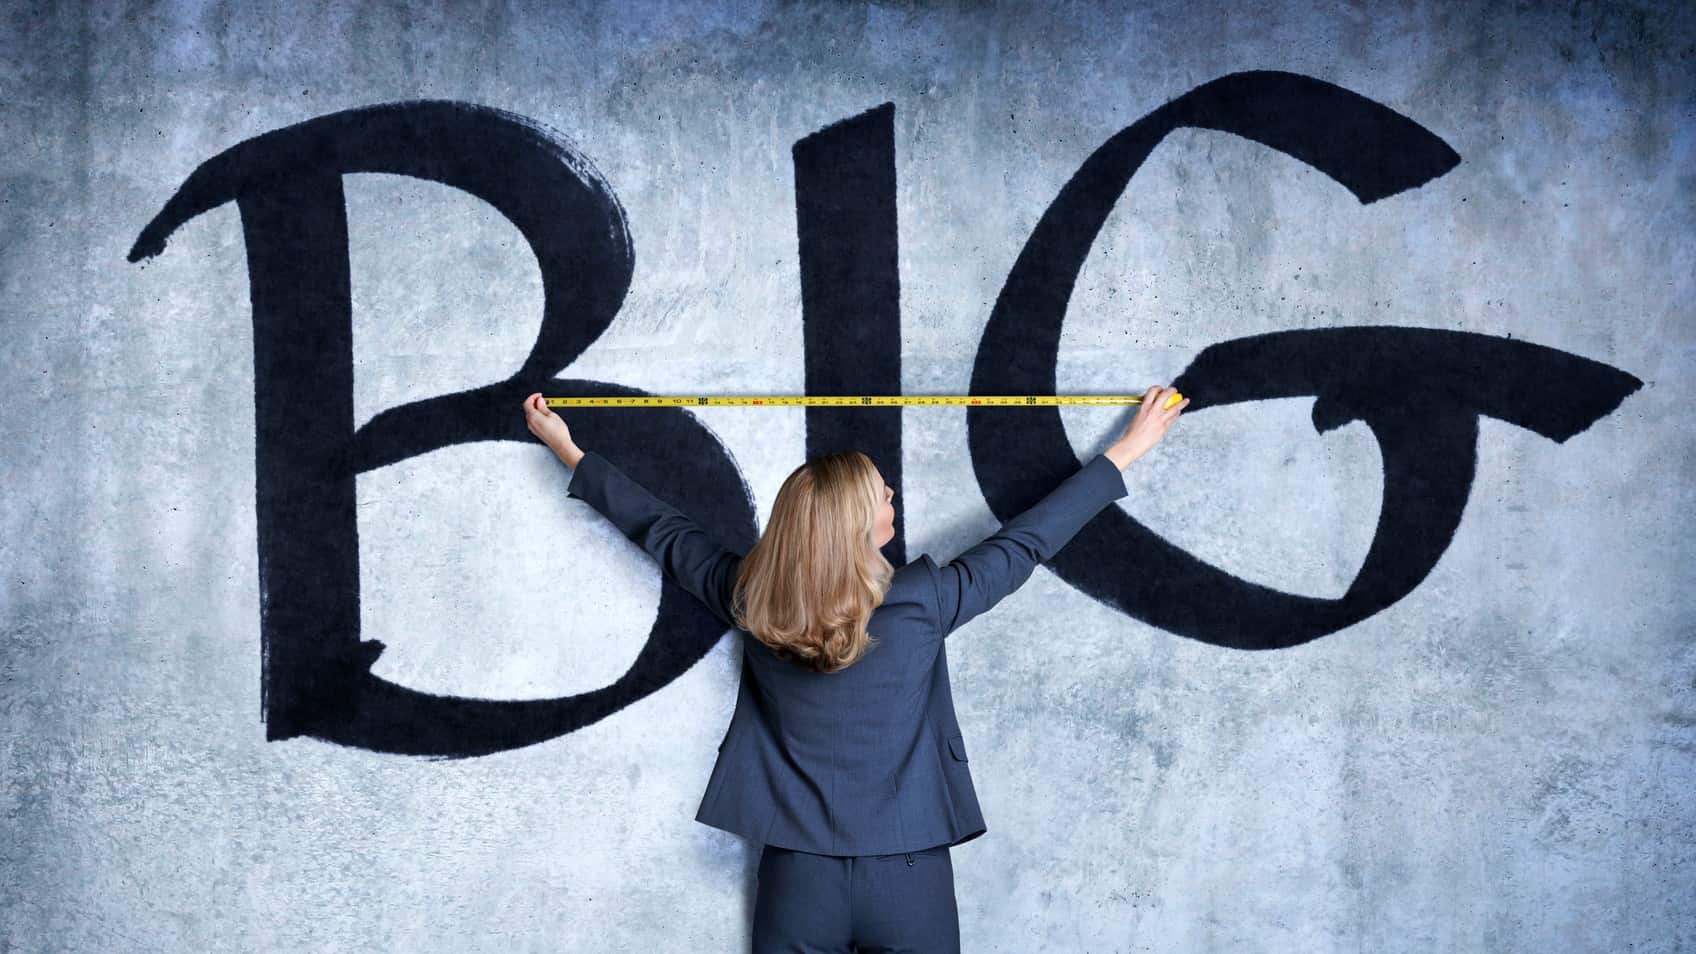 A woman holds a tape measure against a wall painted with the word BIG, indicating a surge in gowth shares